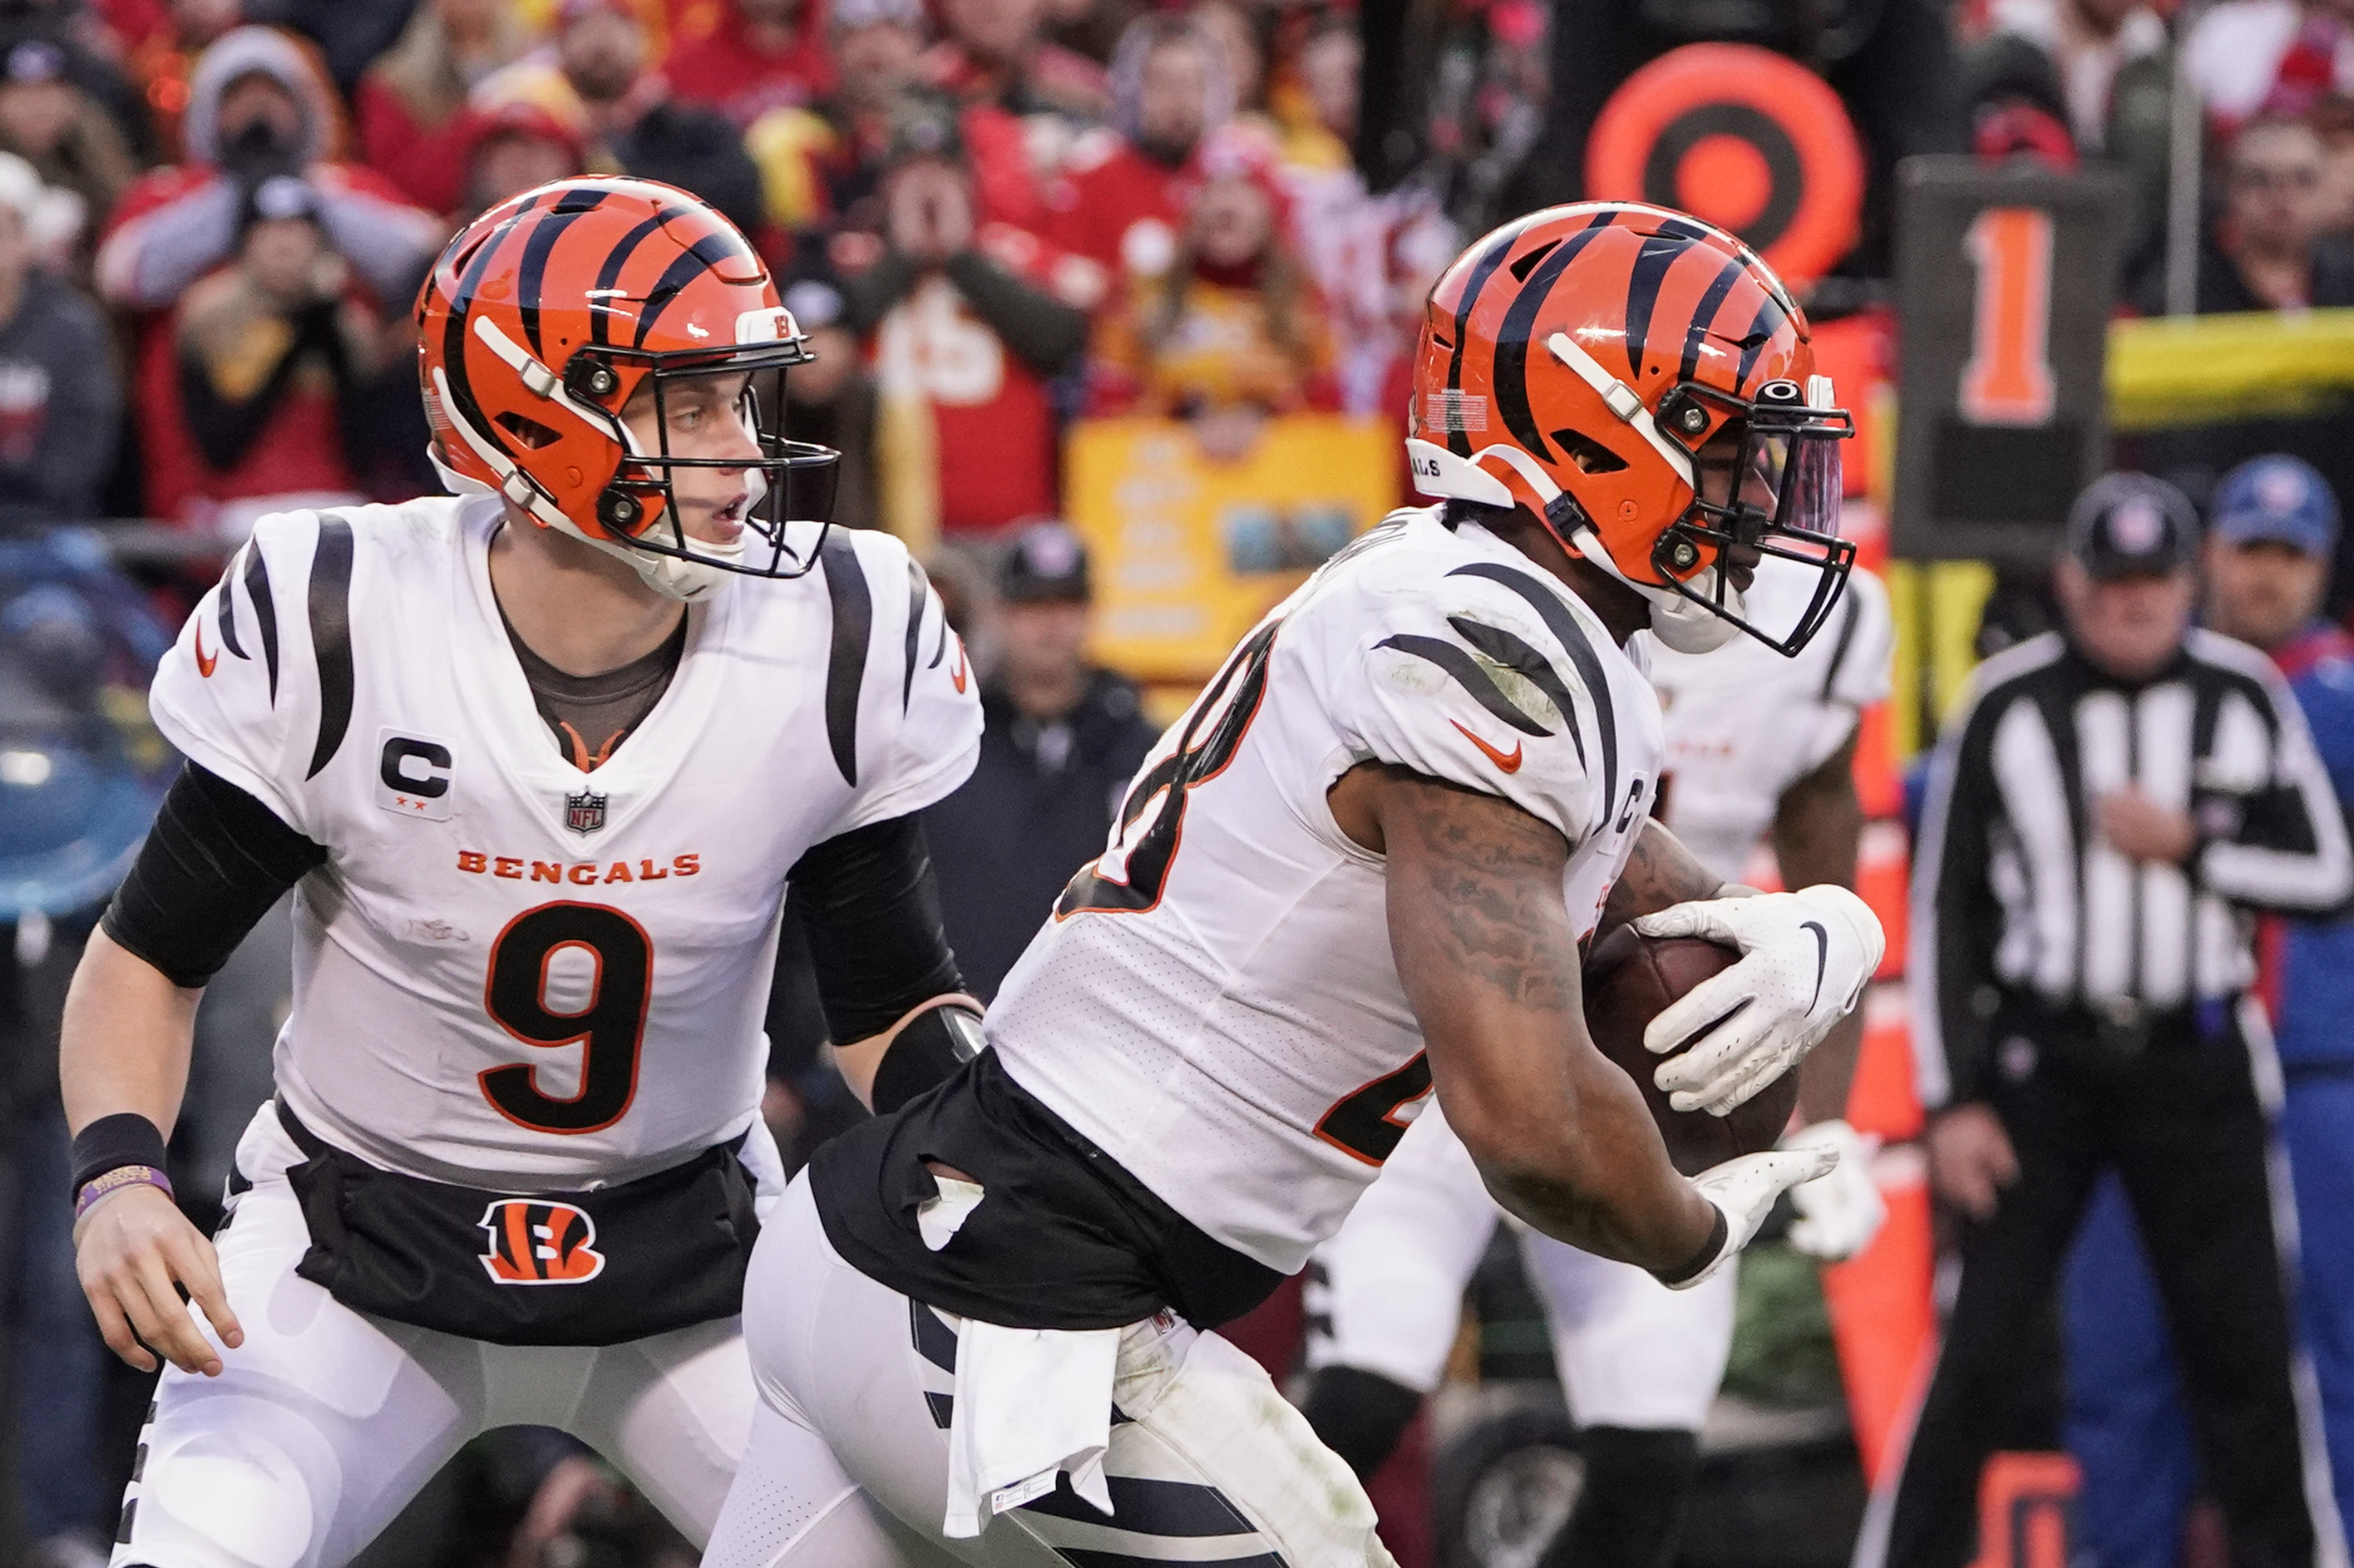 large bet on bengals